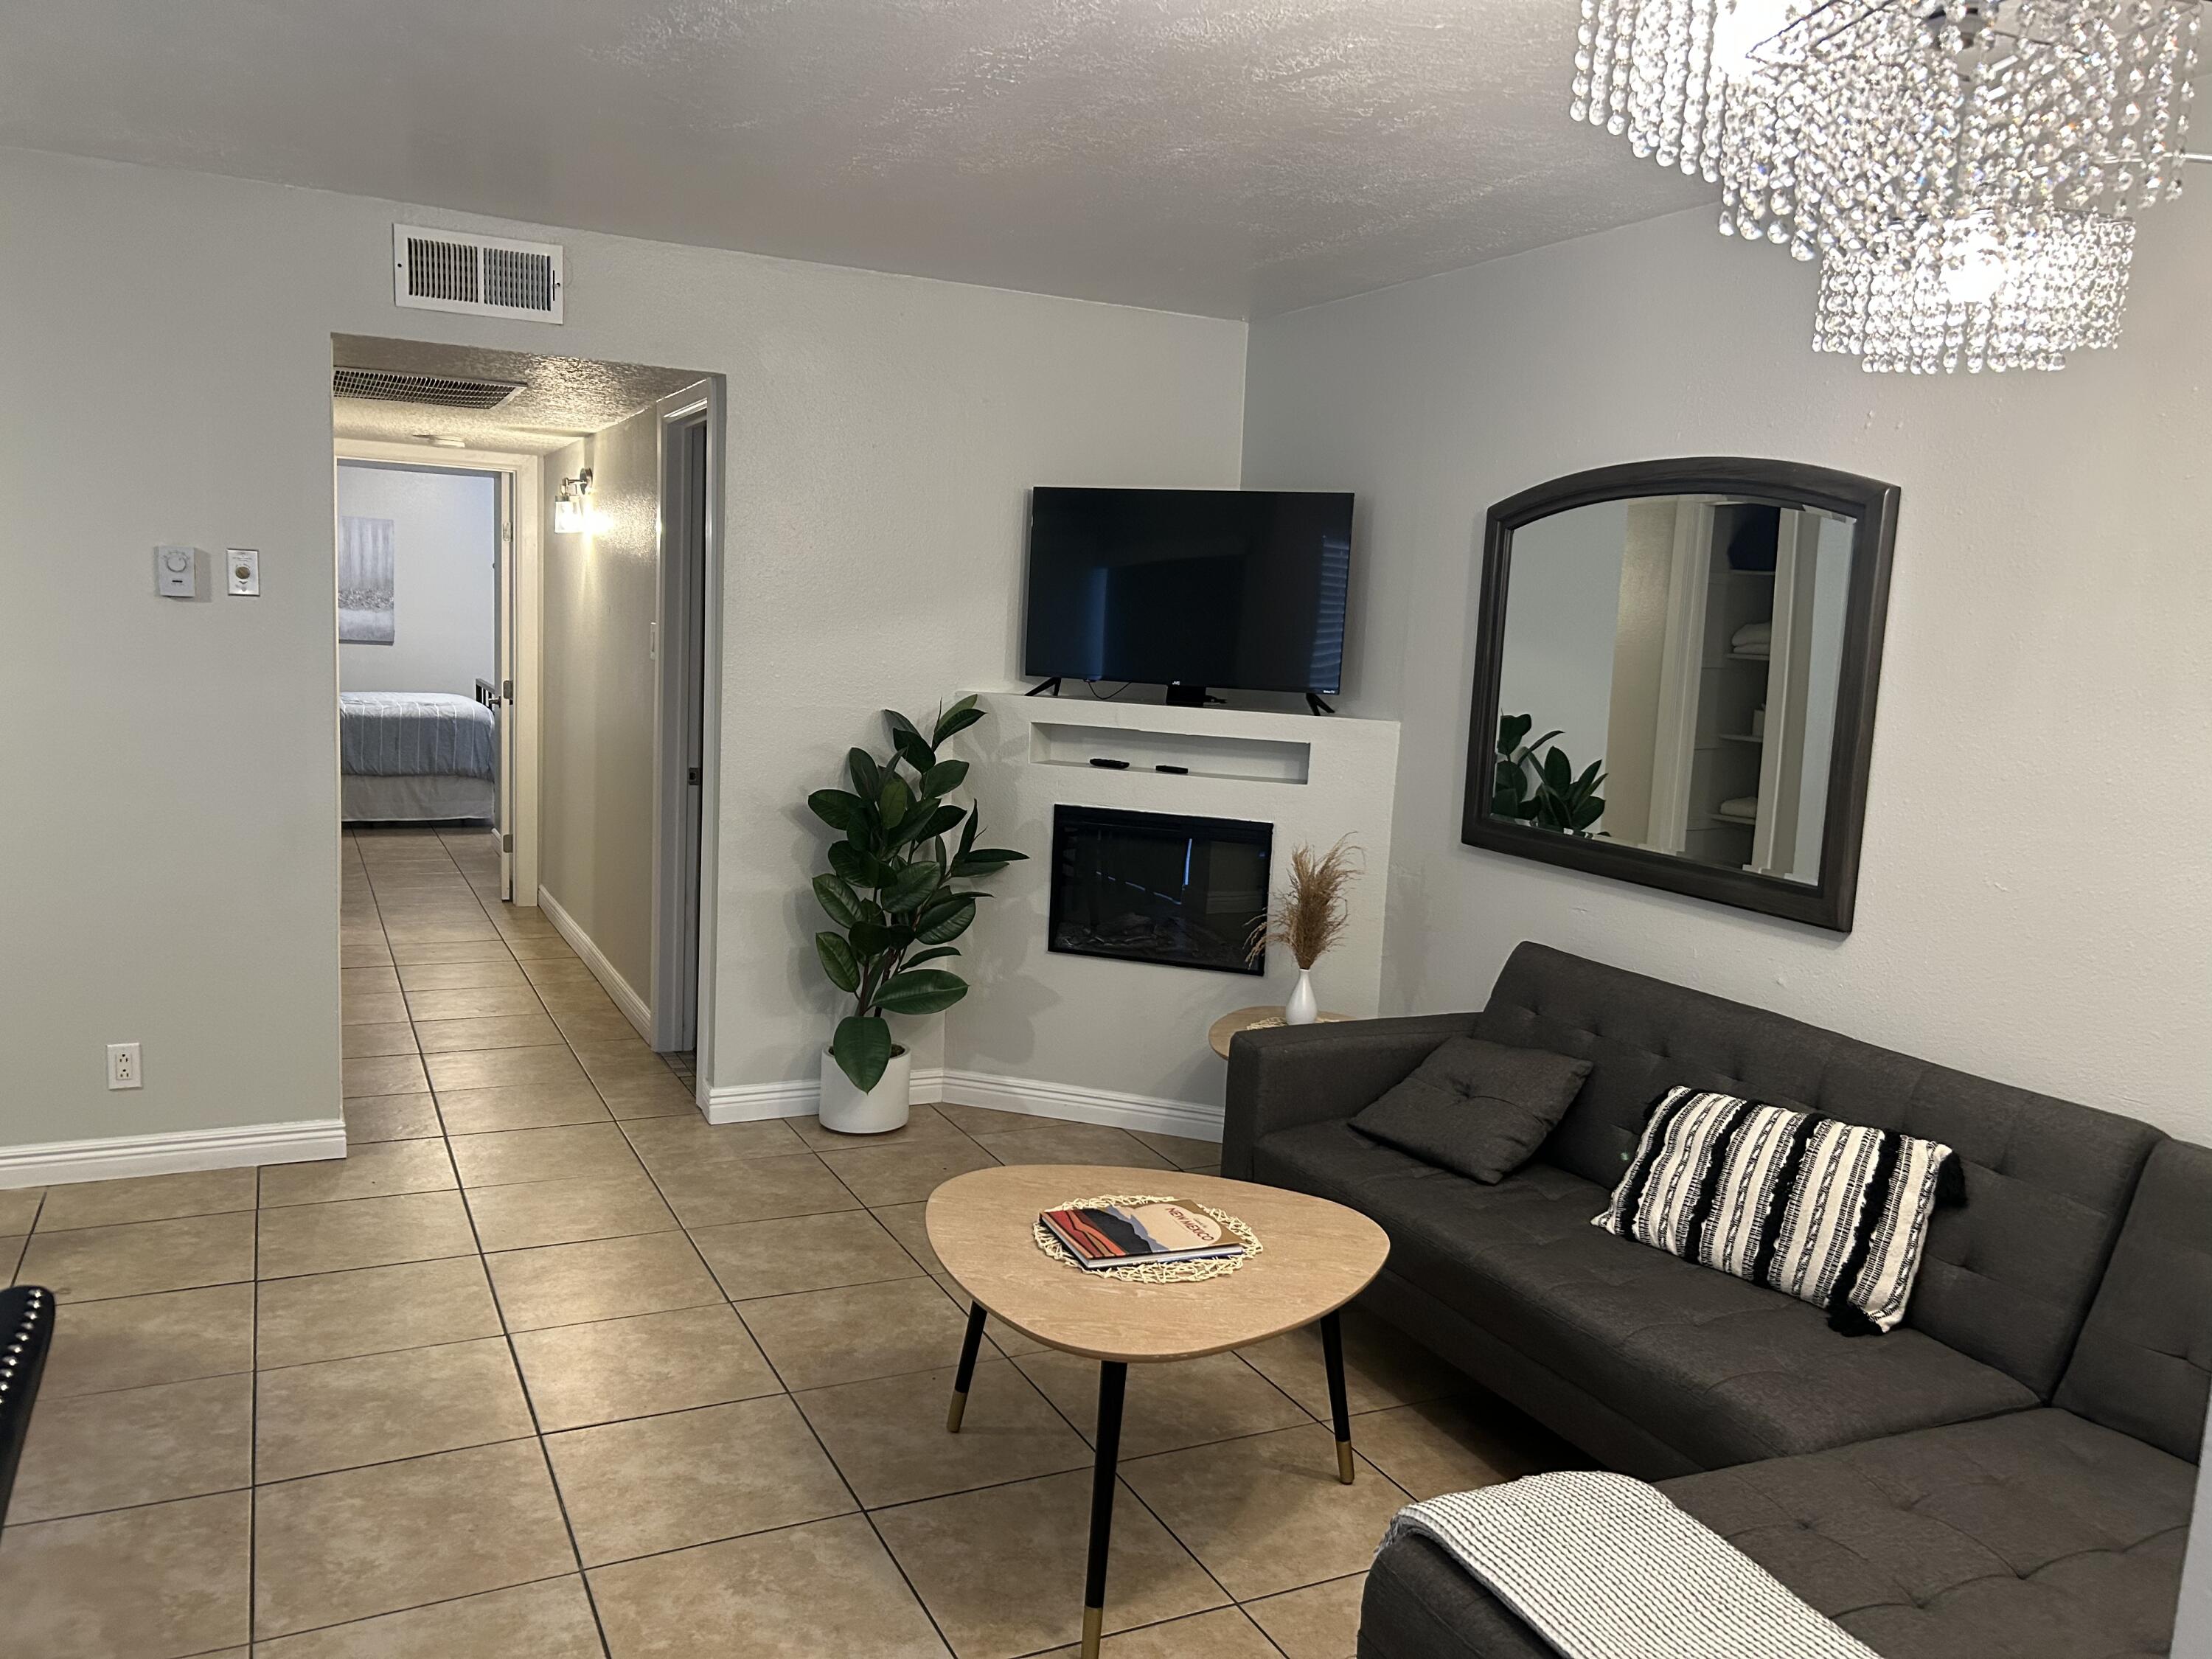 Charming Condo with many upgrades. Tile floors throughout this 2 Bedroom, 2 Bath beauty. Furniture and accessories can stay with property at an additional cost. This unit has  Washer and Dryer that convey. Bring all offers Won't last long!!!